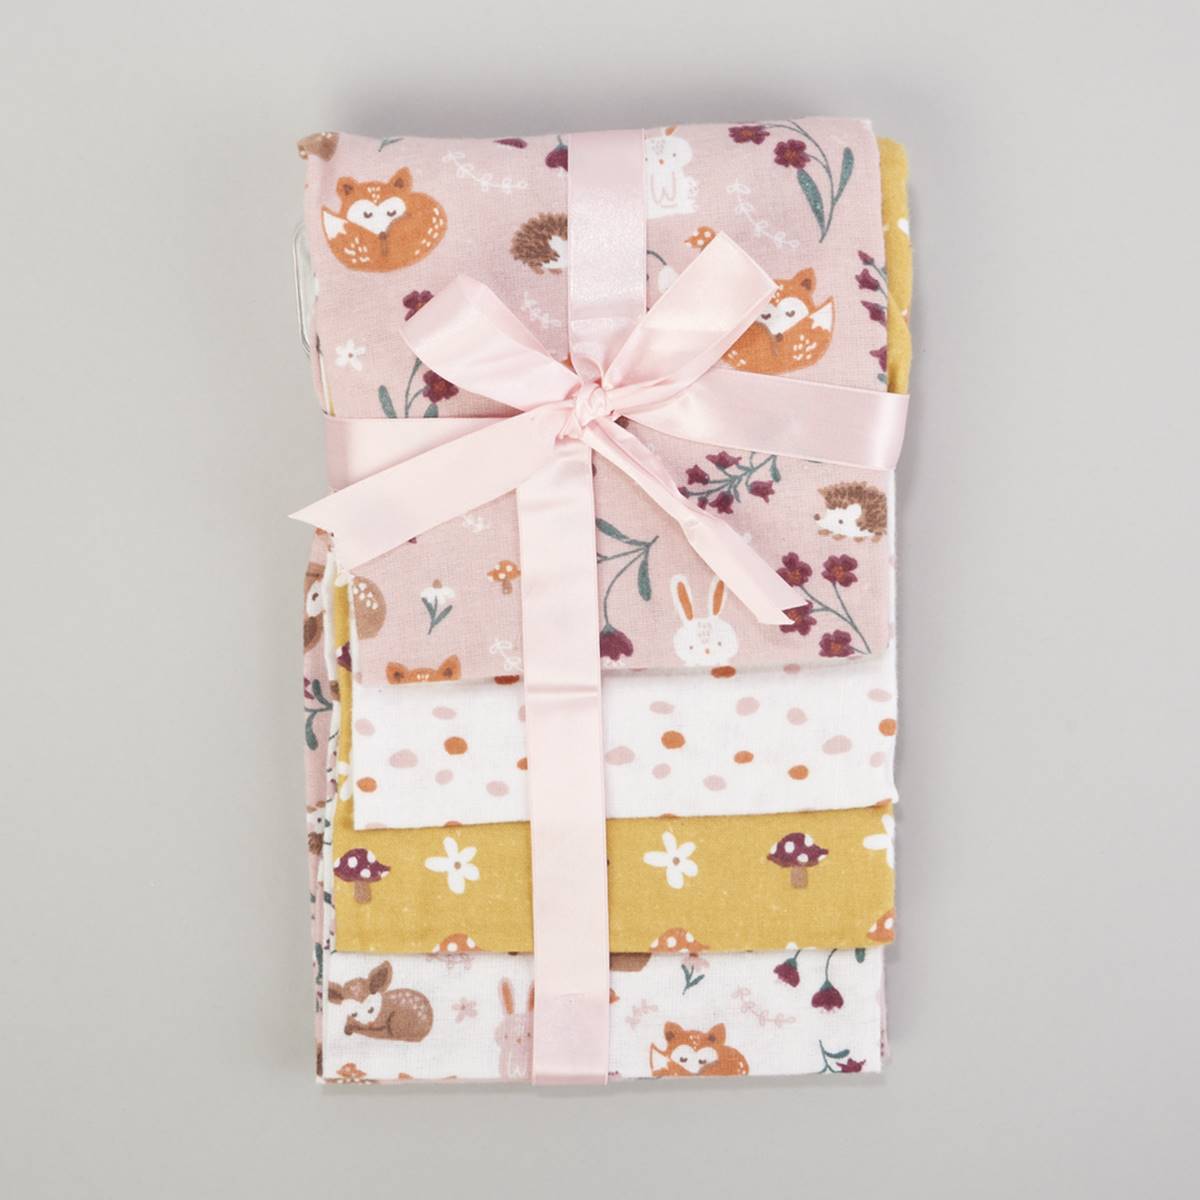 Cribmates 4pk. Whimsical Forest Receiving Blankets